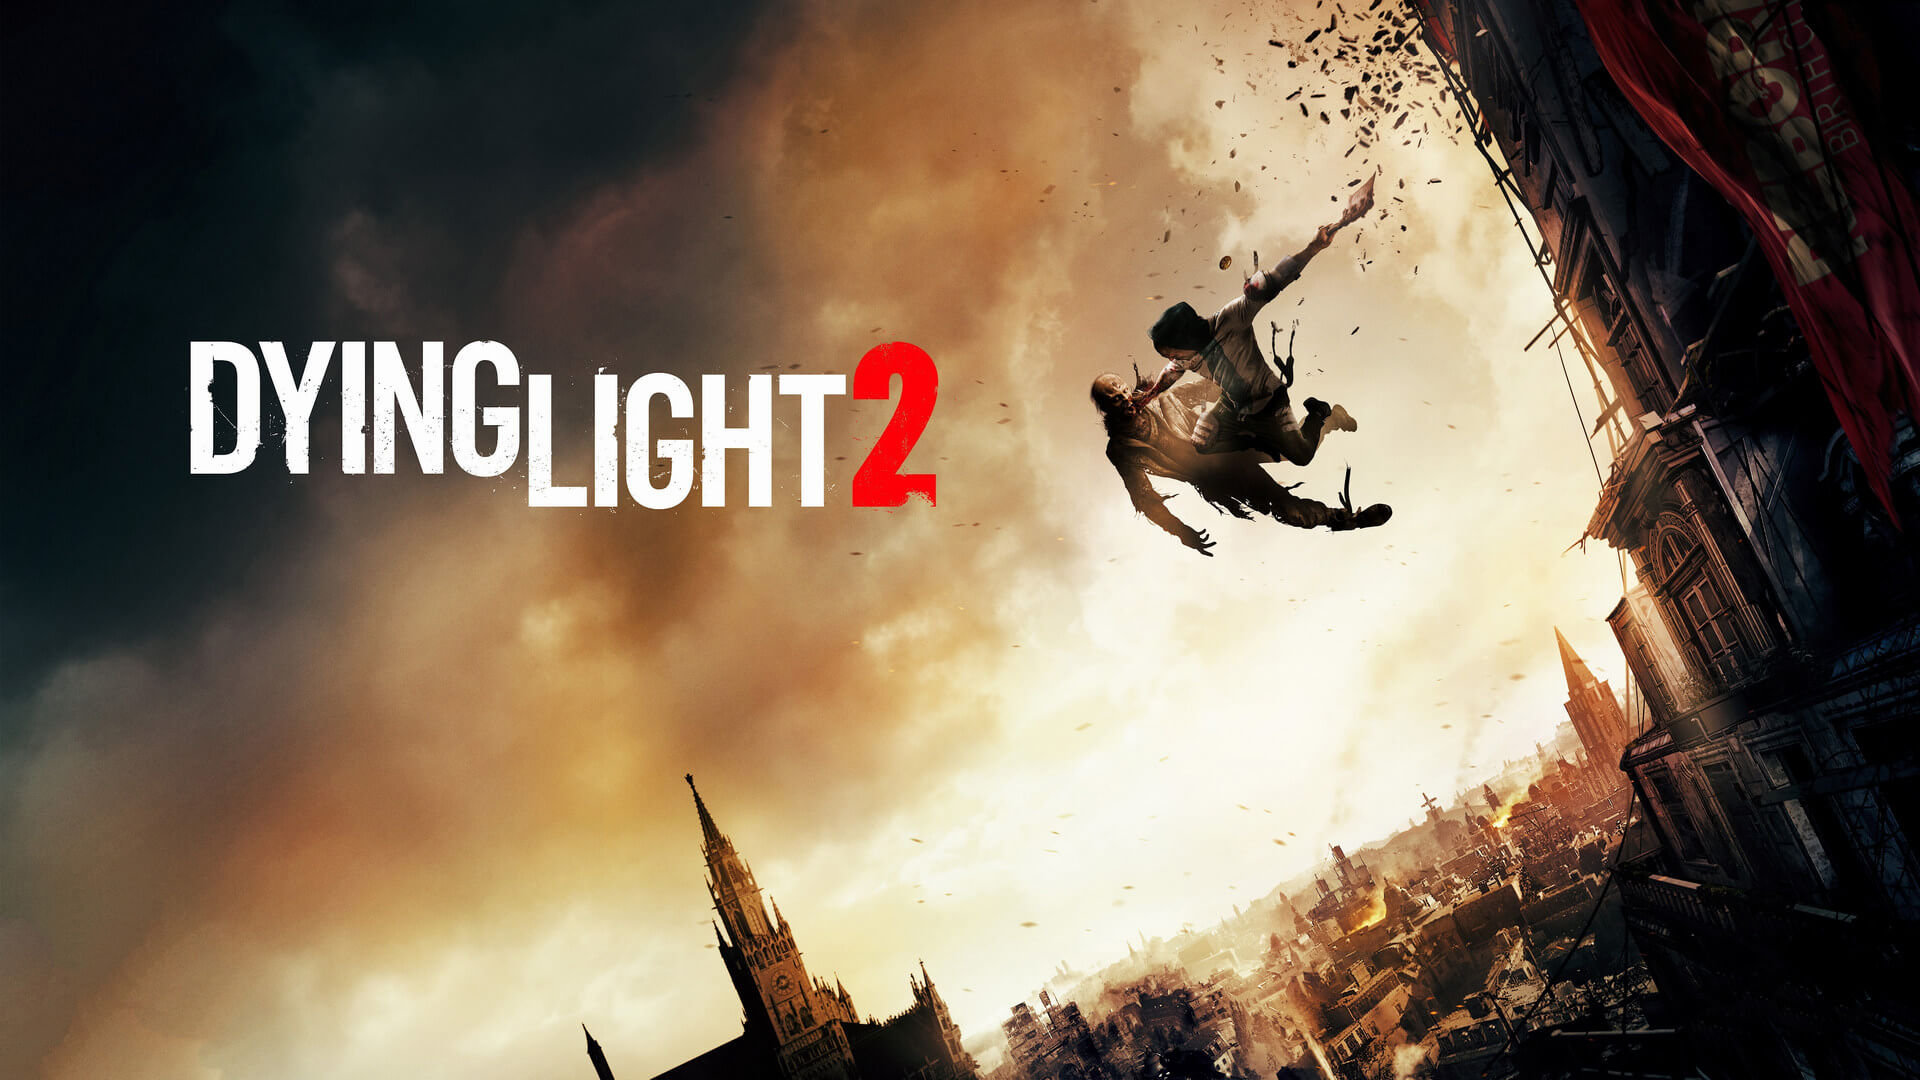 Dying Light has been removed from Steam and has been replaced by